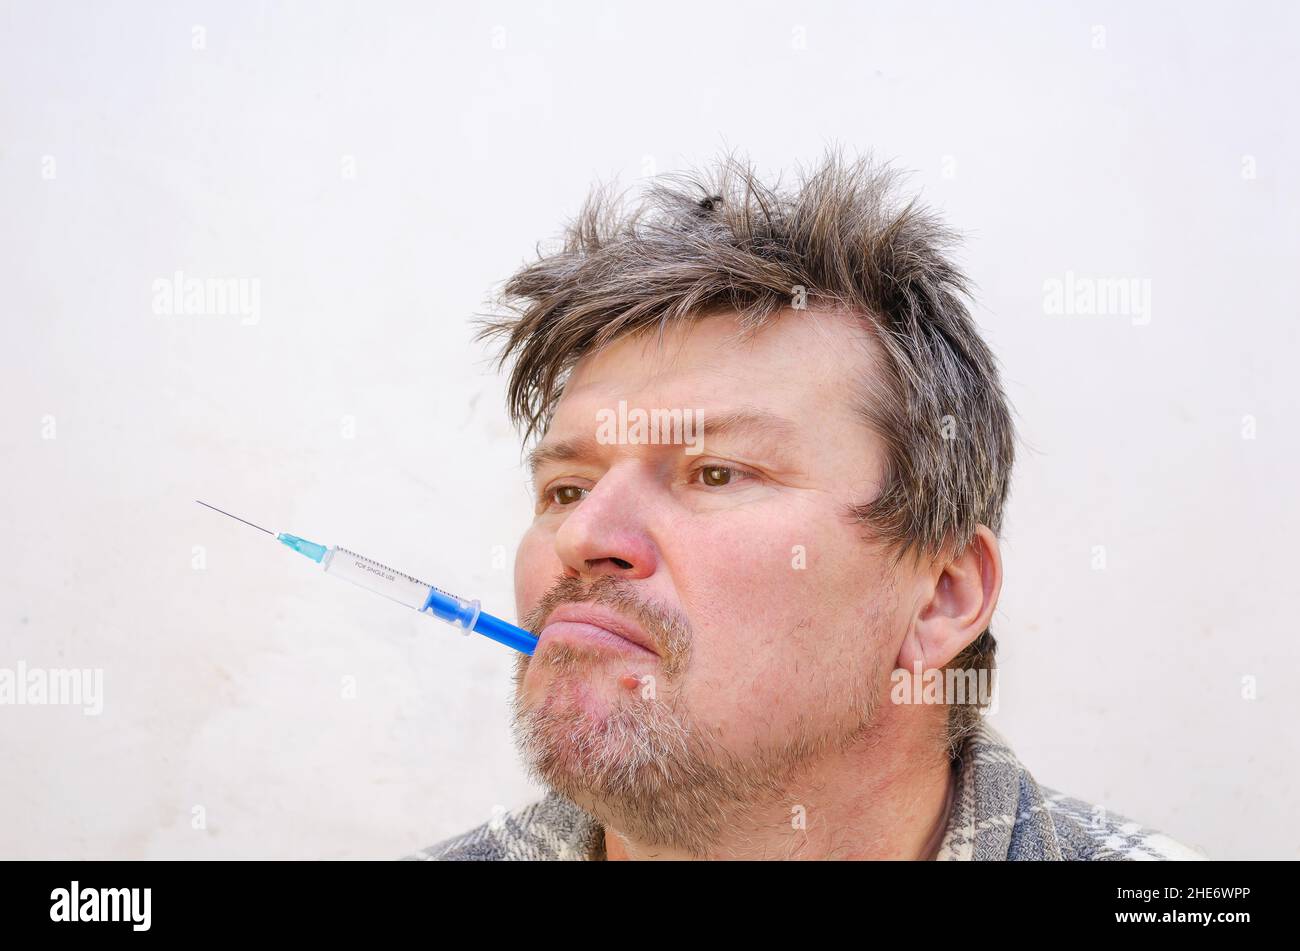 Portrait of a weirdo holding a blue syringe in his mouth. Unshaven man holding a disposable syringe full of liquid. Adult male with ruffled hair.  Ind Stock Photo